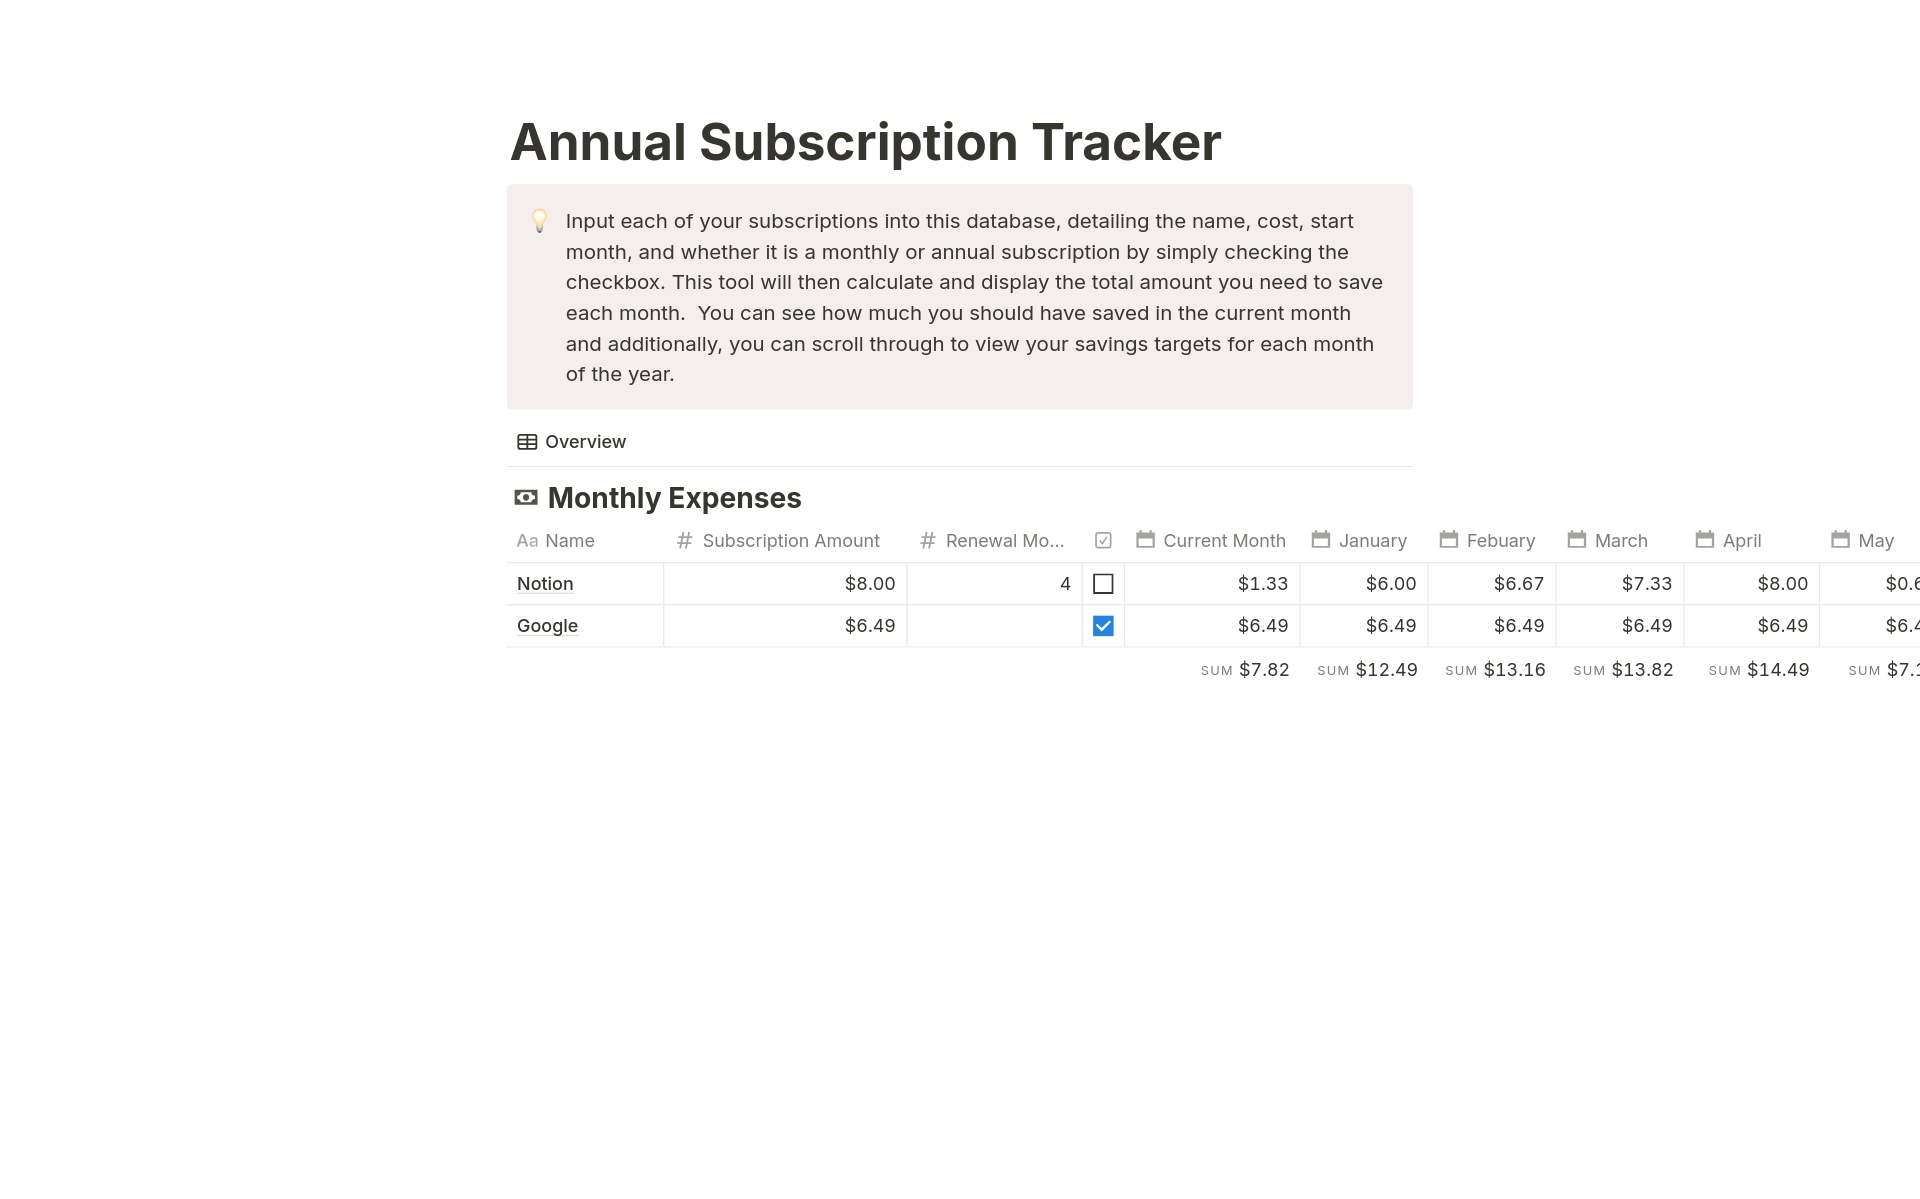 Stay ahead of your annual subscriptions with our simple tracker, designed to help you effortlessly manage and save the necessary funds each month. Never let those yearly expenses catch you off guard again.